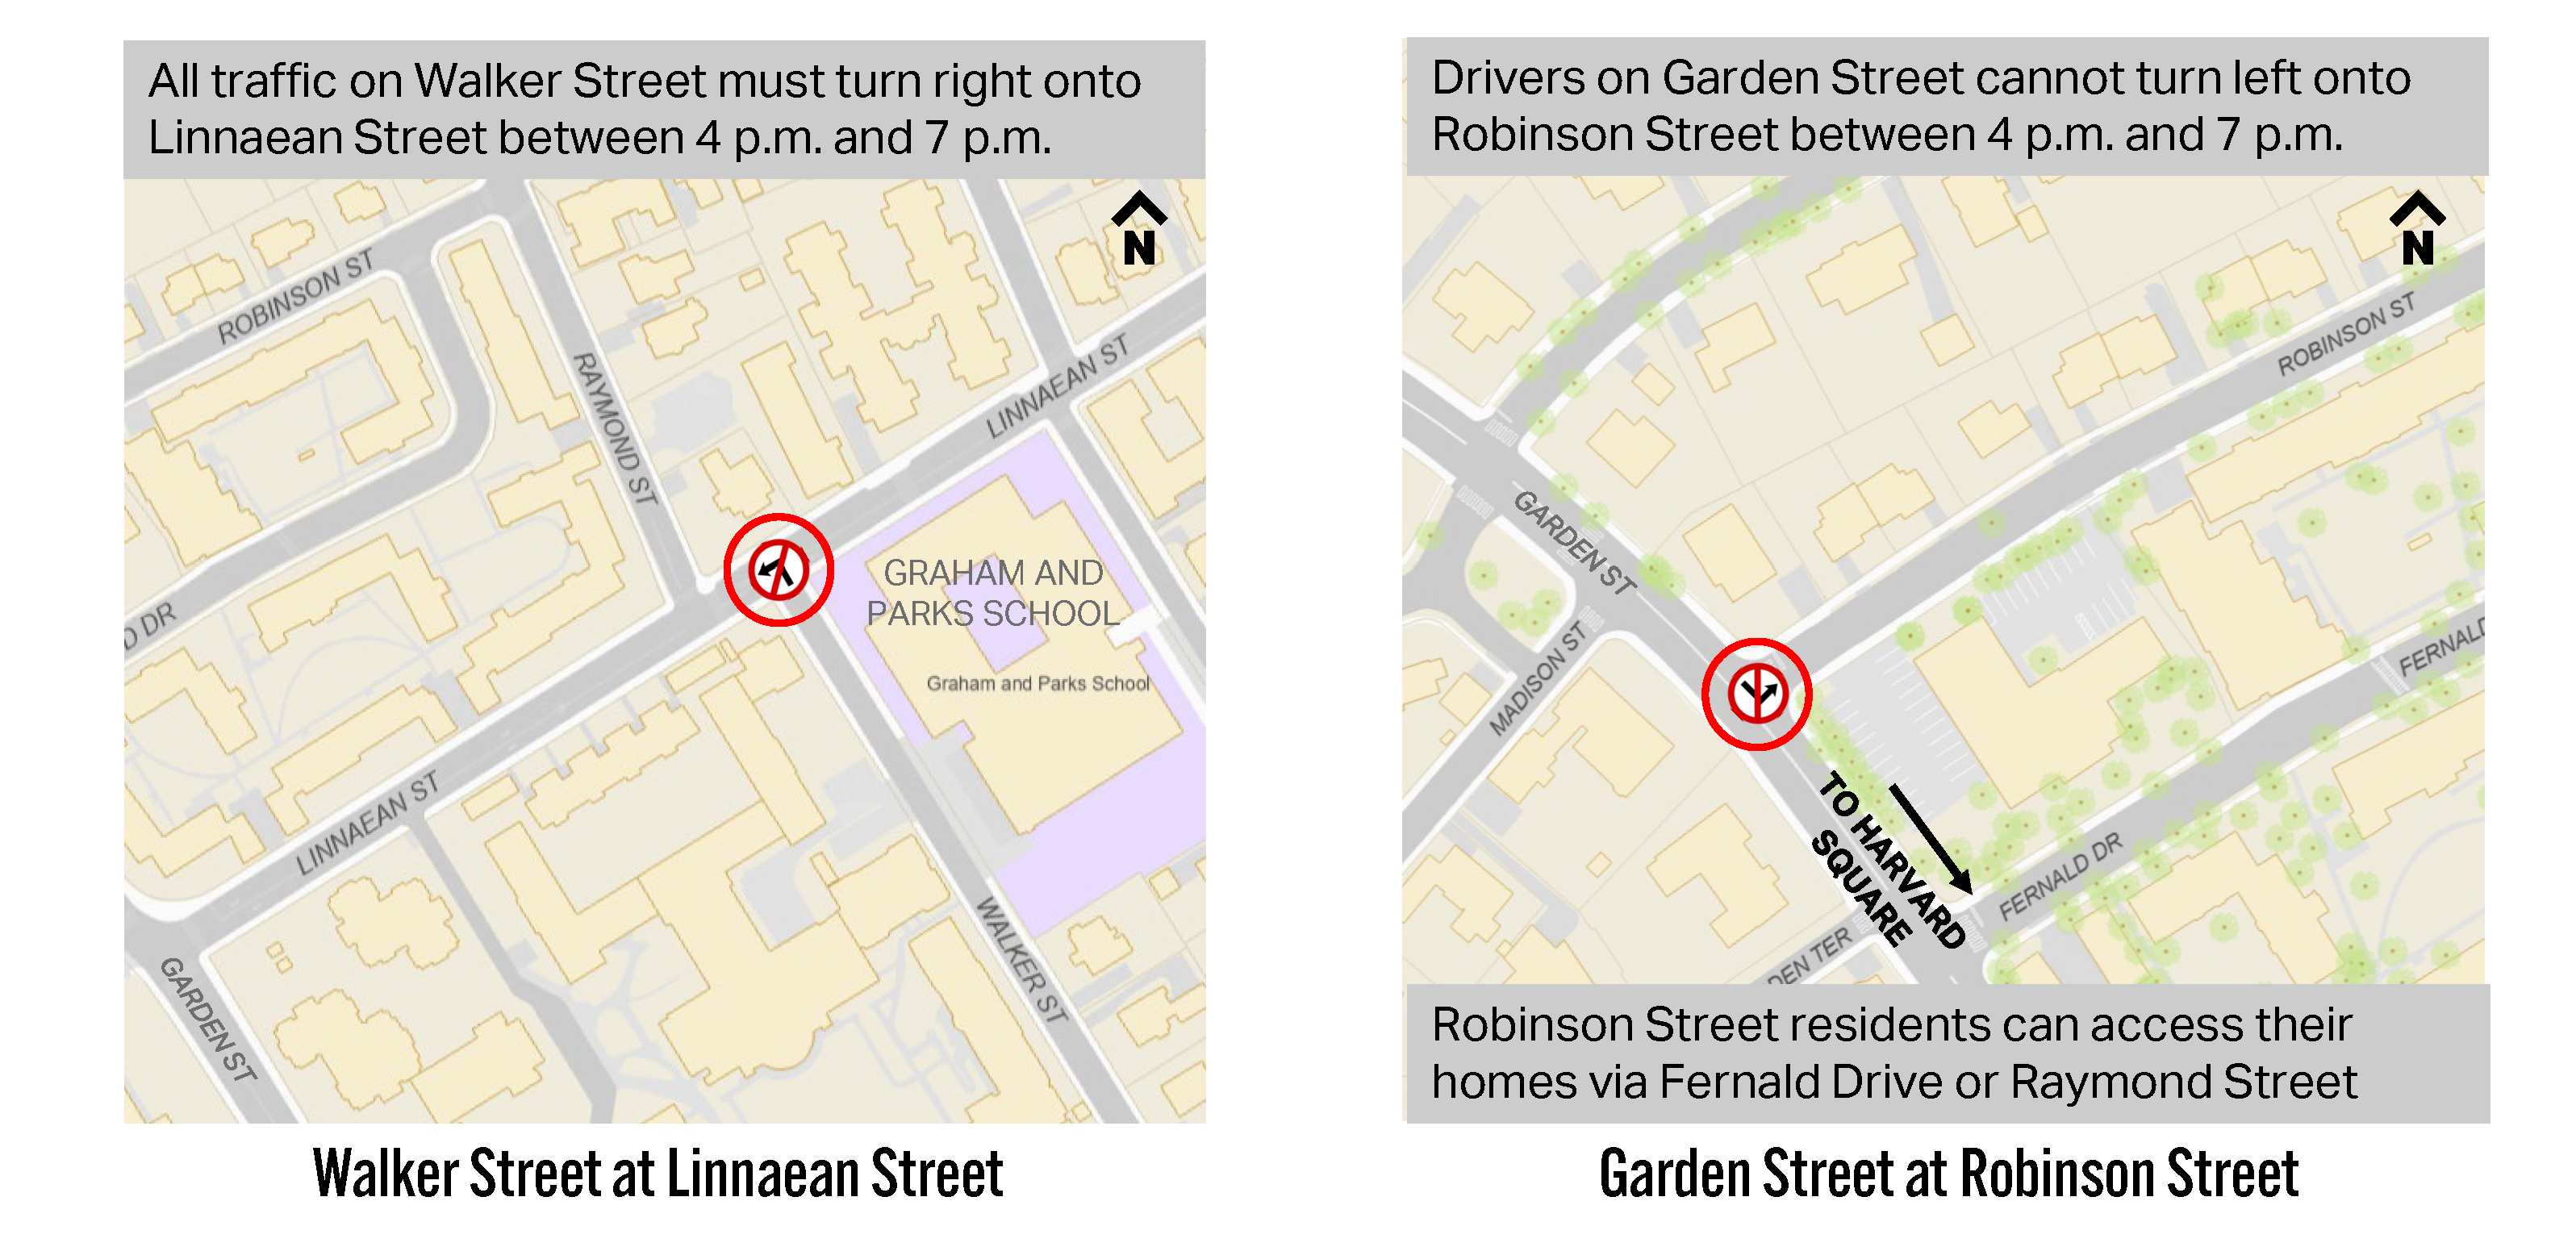 Two maps show where the "No Left Turns" will be. All traffic on Walker Street must turn right onto Linnaean Street between 4 p.m. and 7 p.m. Drivers on Garden Street cannot turn left onto Robinson Street between 4 p.m. and 7 p.m. Robinson Street residents can access their homes via Fernald Drive or Raymond Street